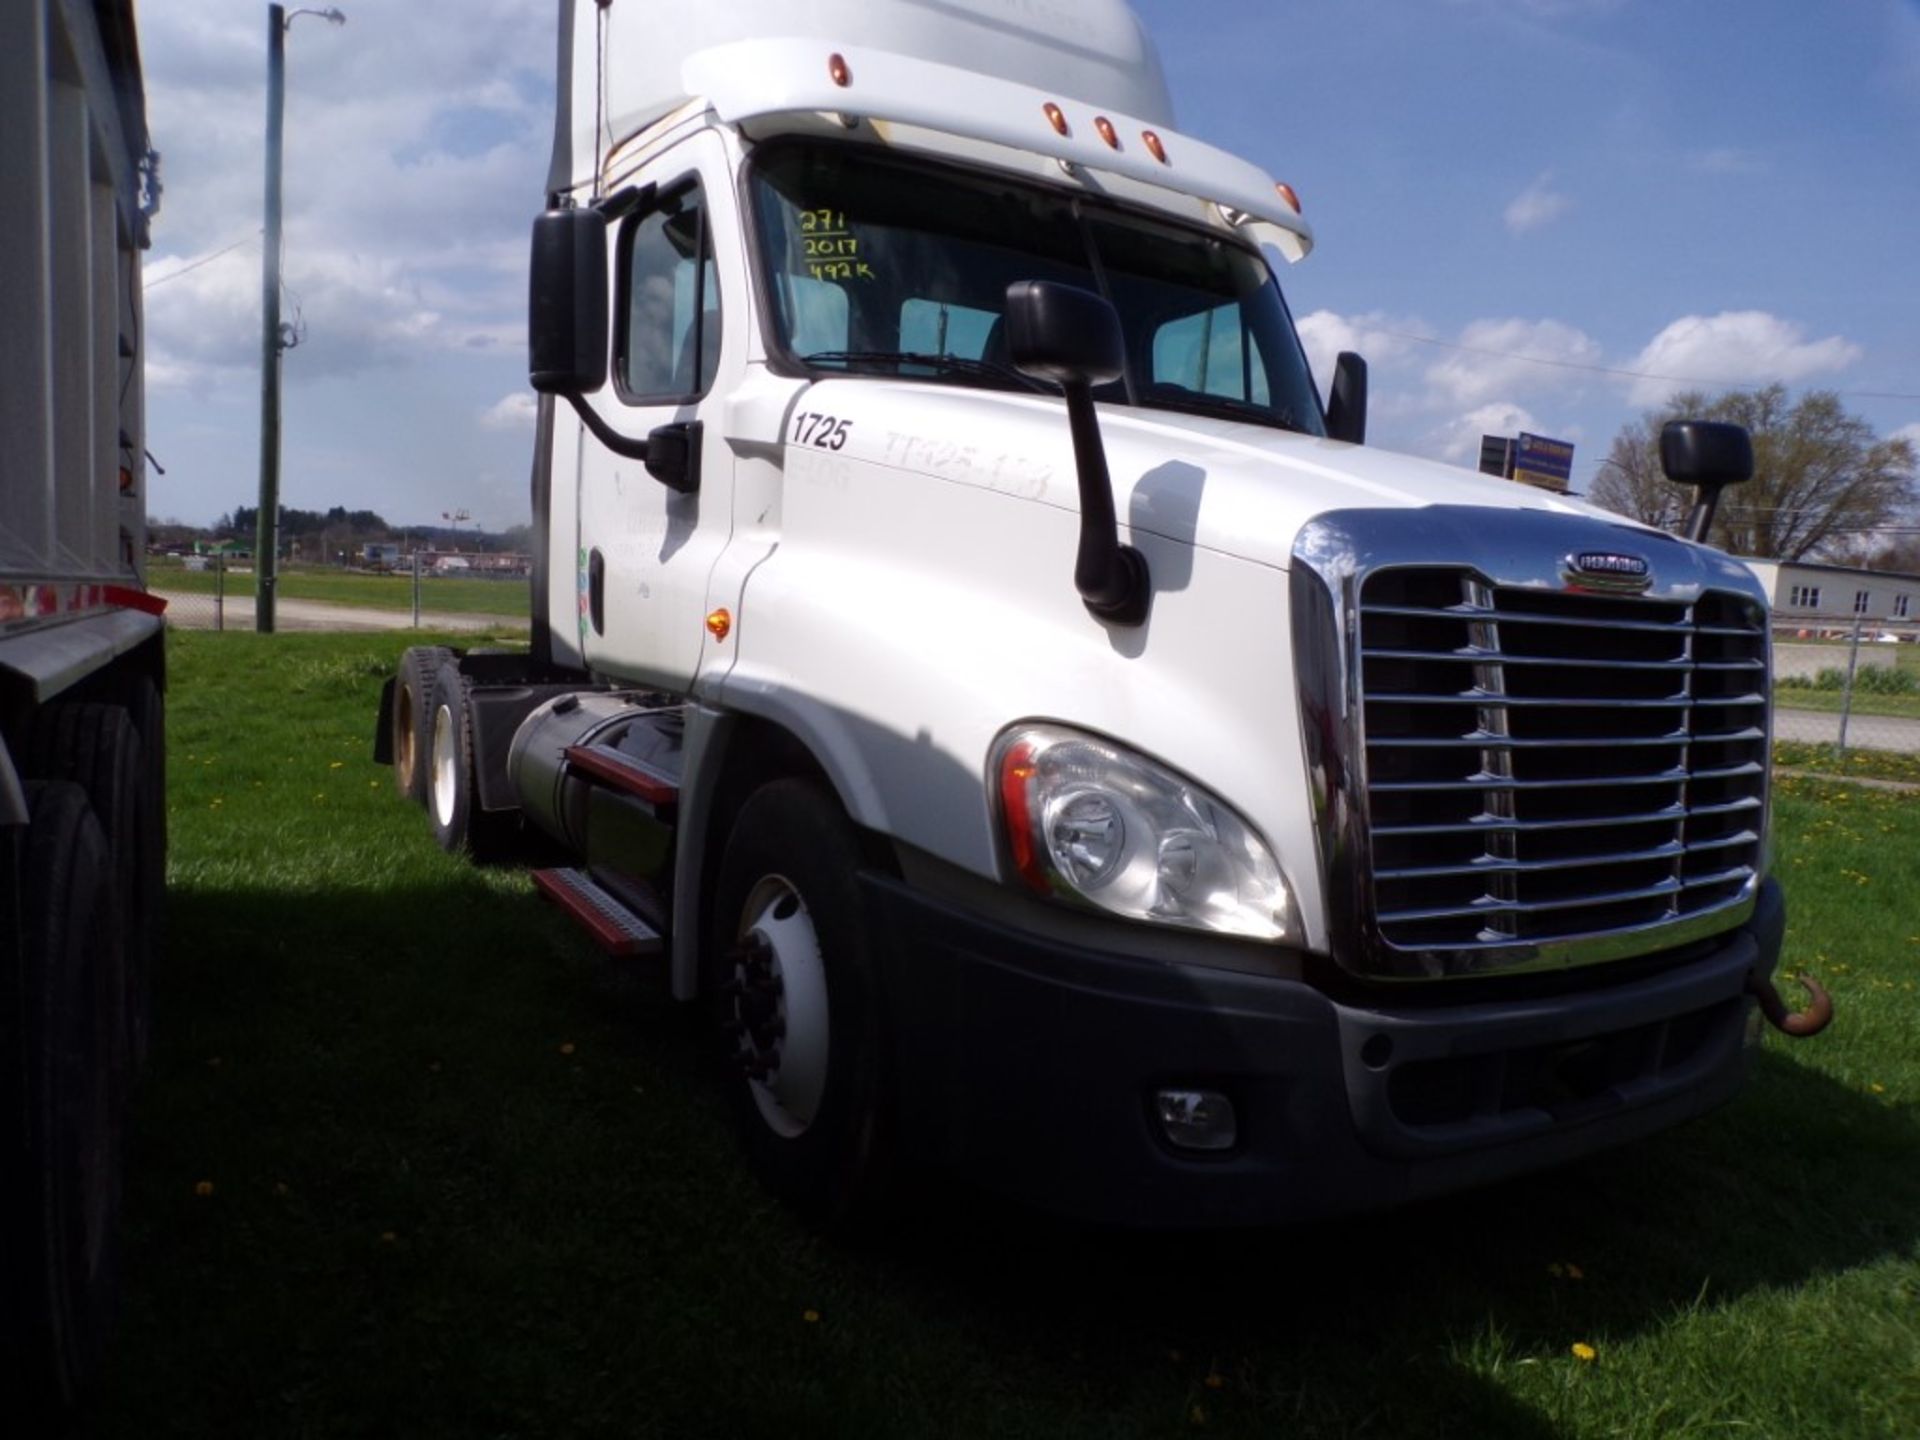 2017 Freightliner Cascadia Tandem Axle Day Cab Truck Tractor, Detroit dd15 Engine, 10 Spd. Manual - Image 6 of 8